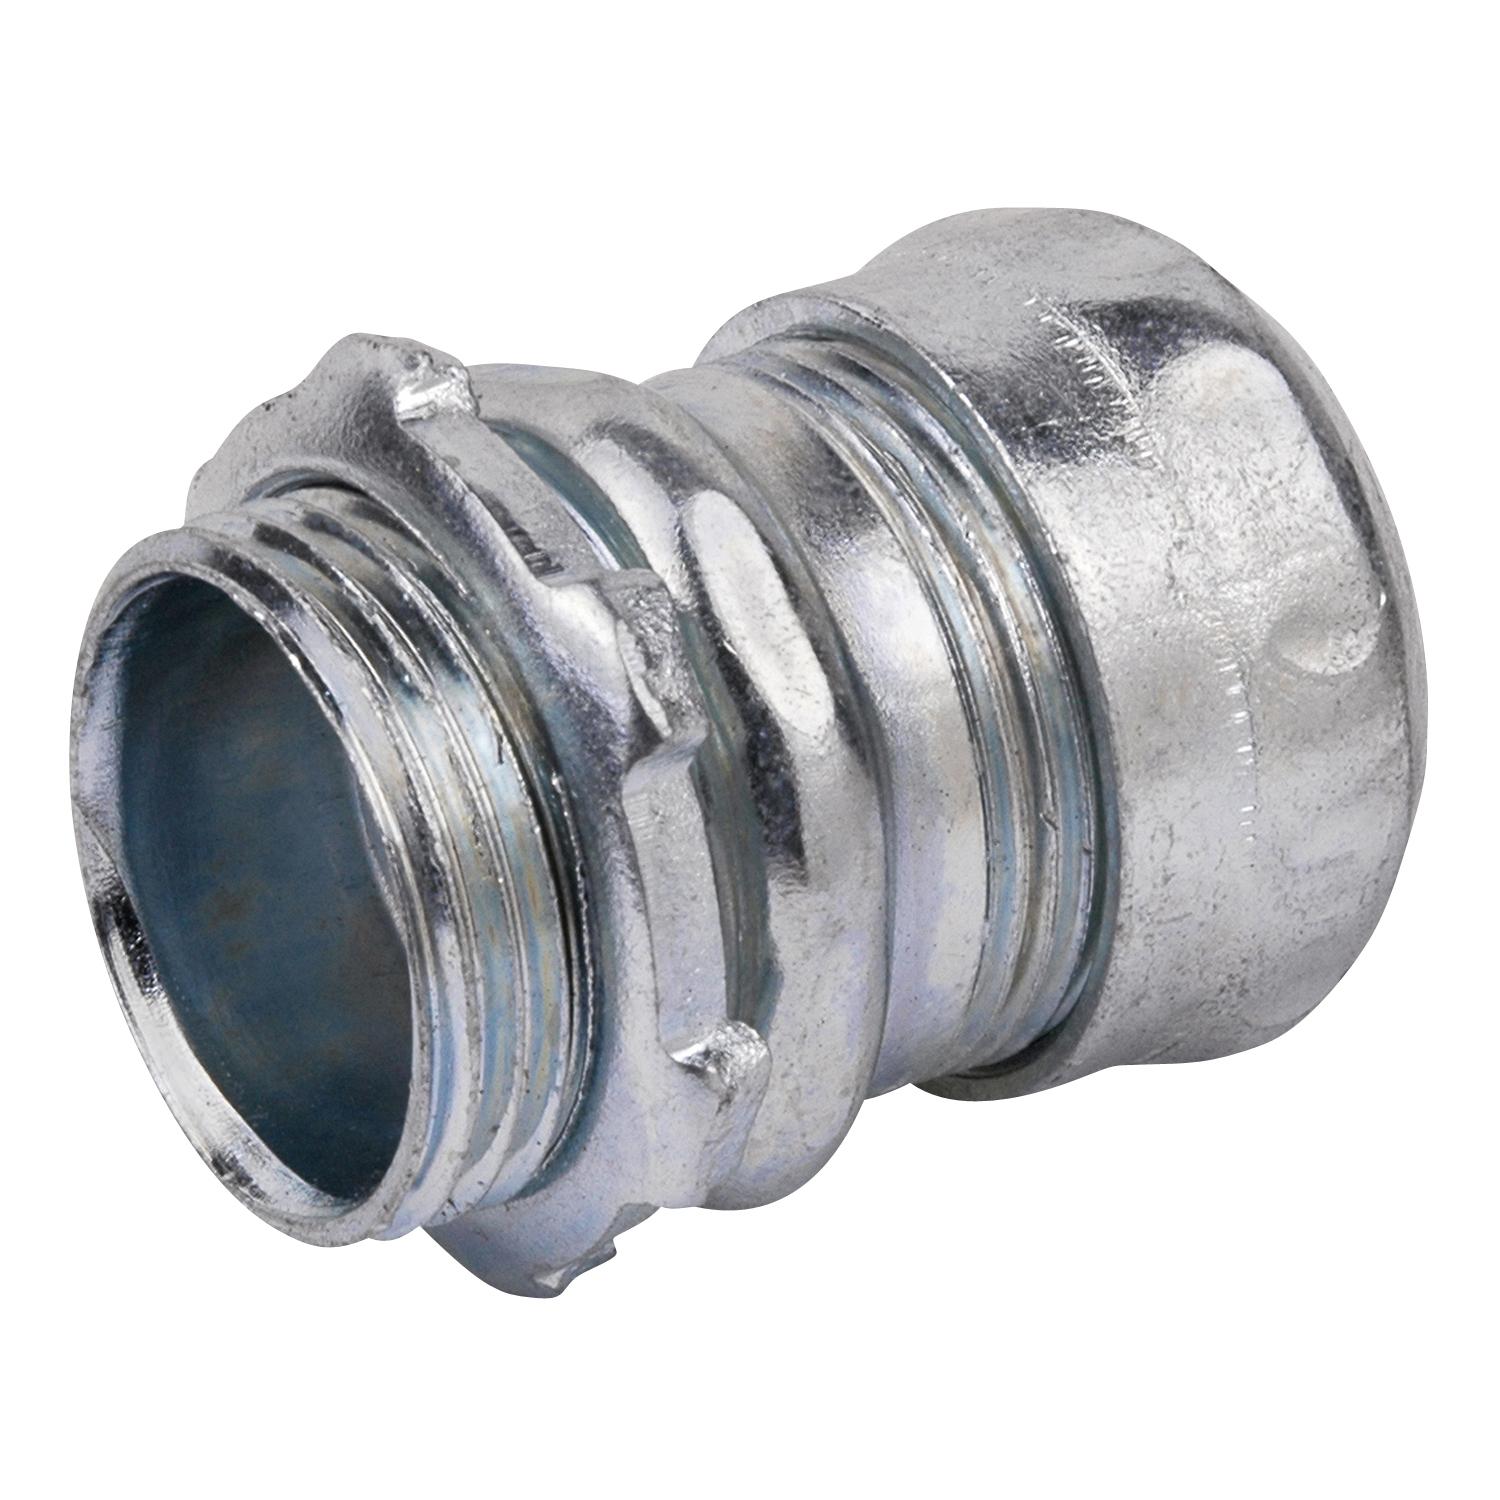 Thomas & Betts TC112A Steel City Compression Connector